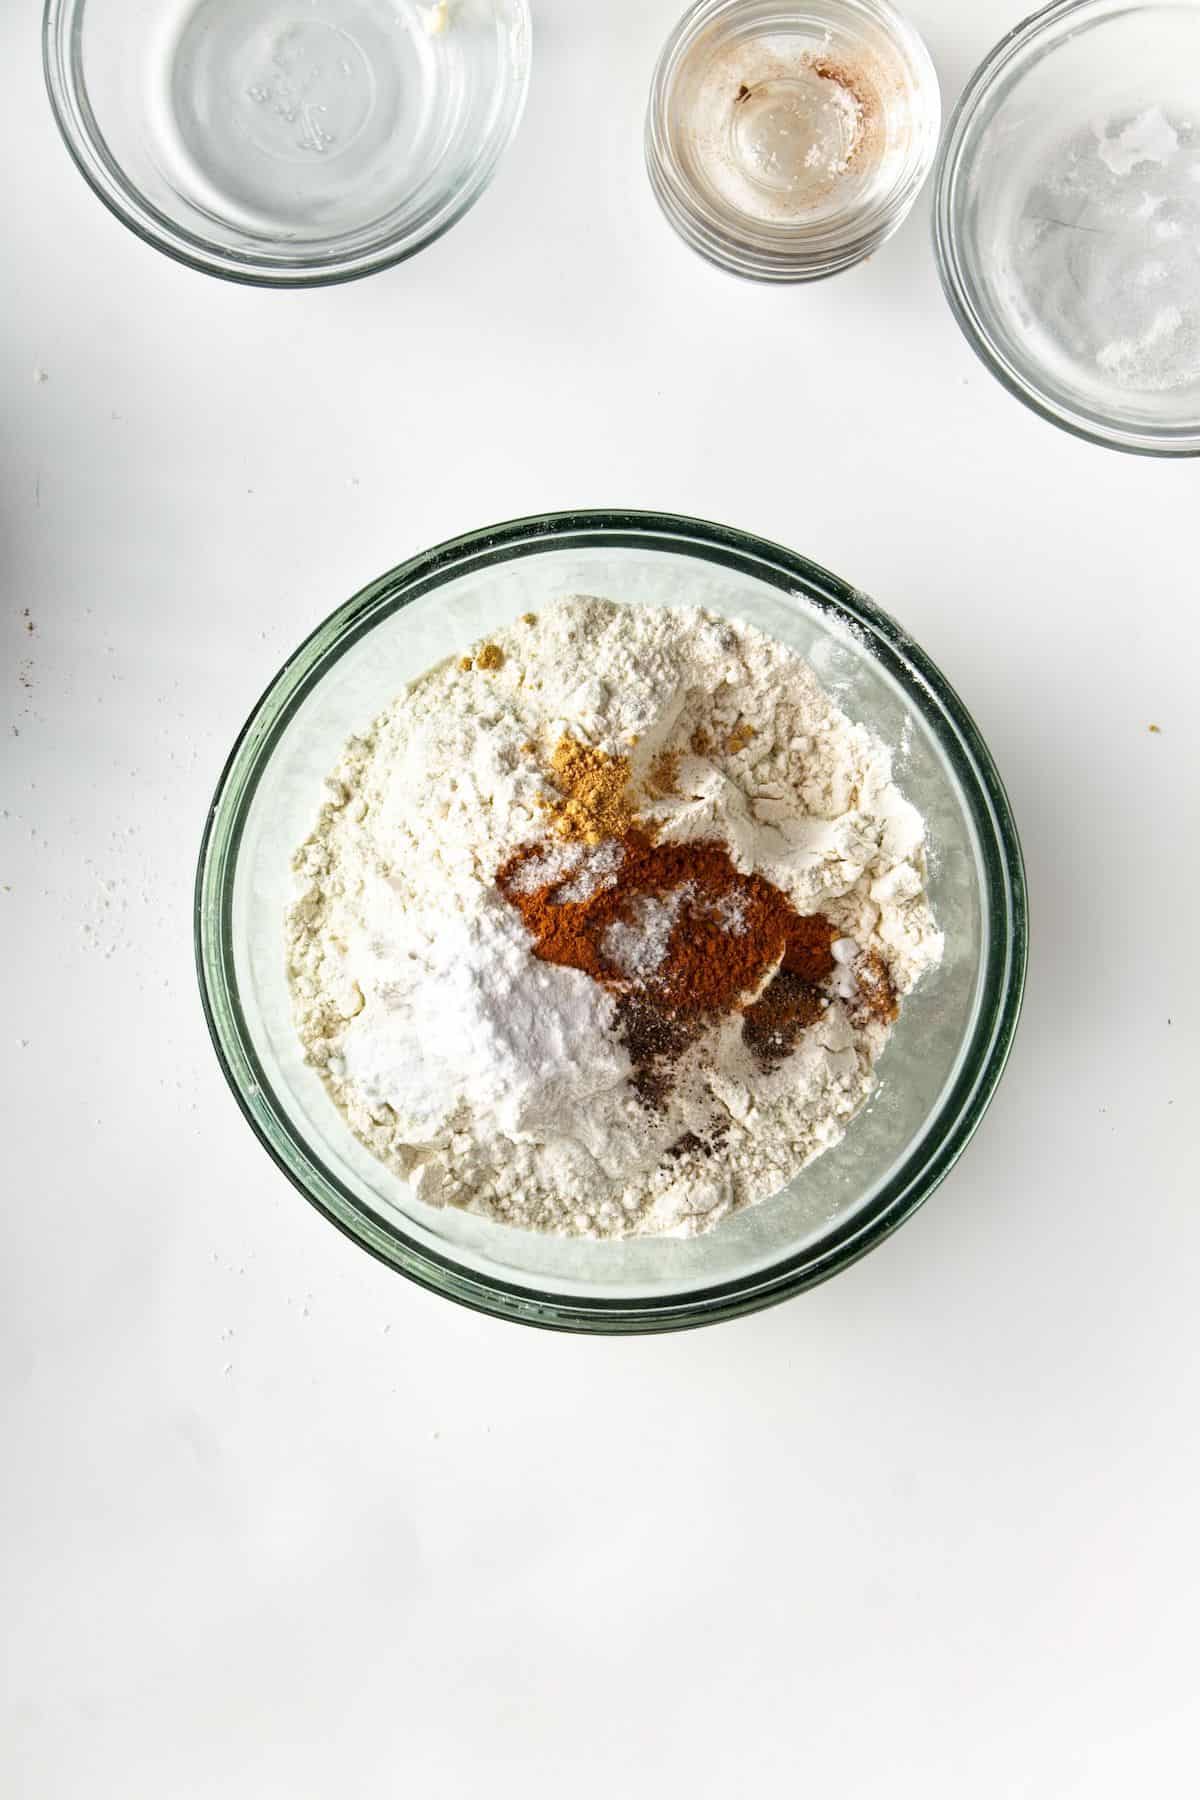 Flour and spices in a glass bowl.